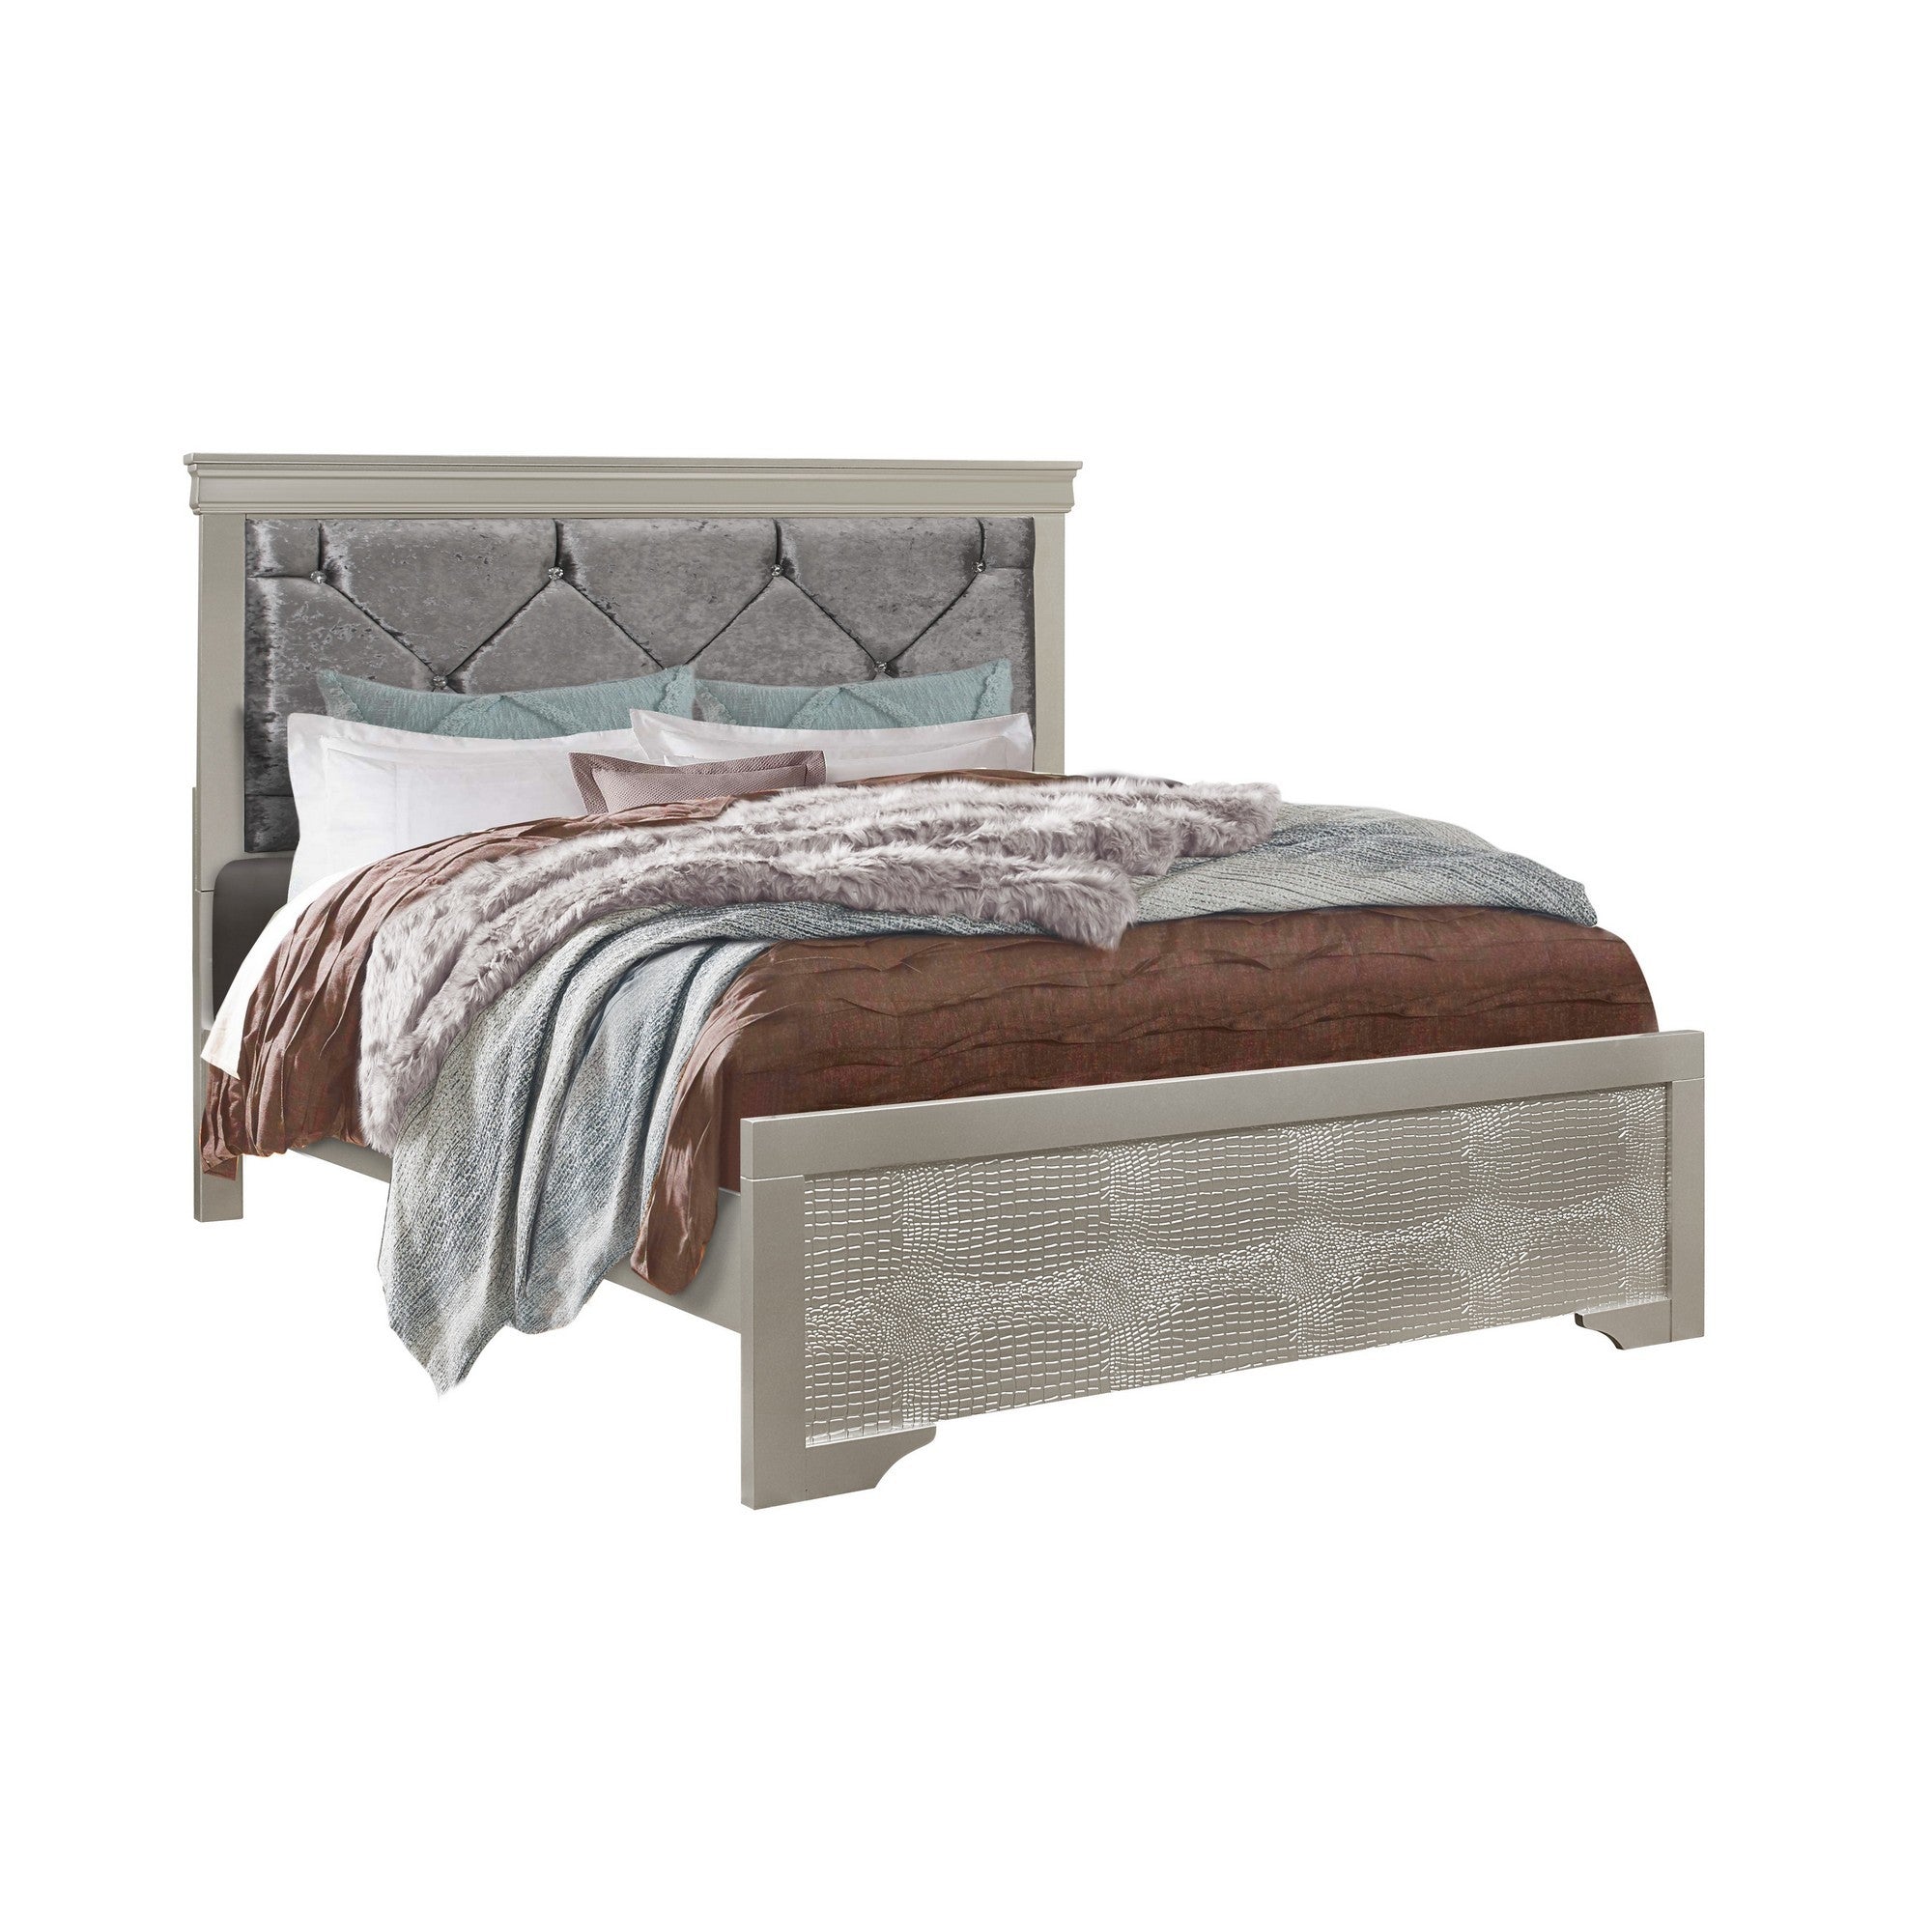 Silver Tone Rubberwood Full Bed with Clean Line Headboard and Footboard Default Title